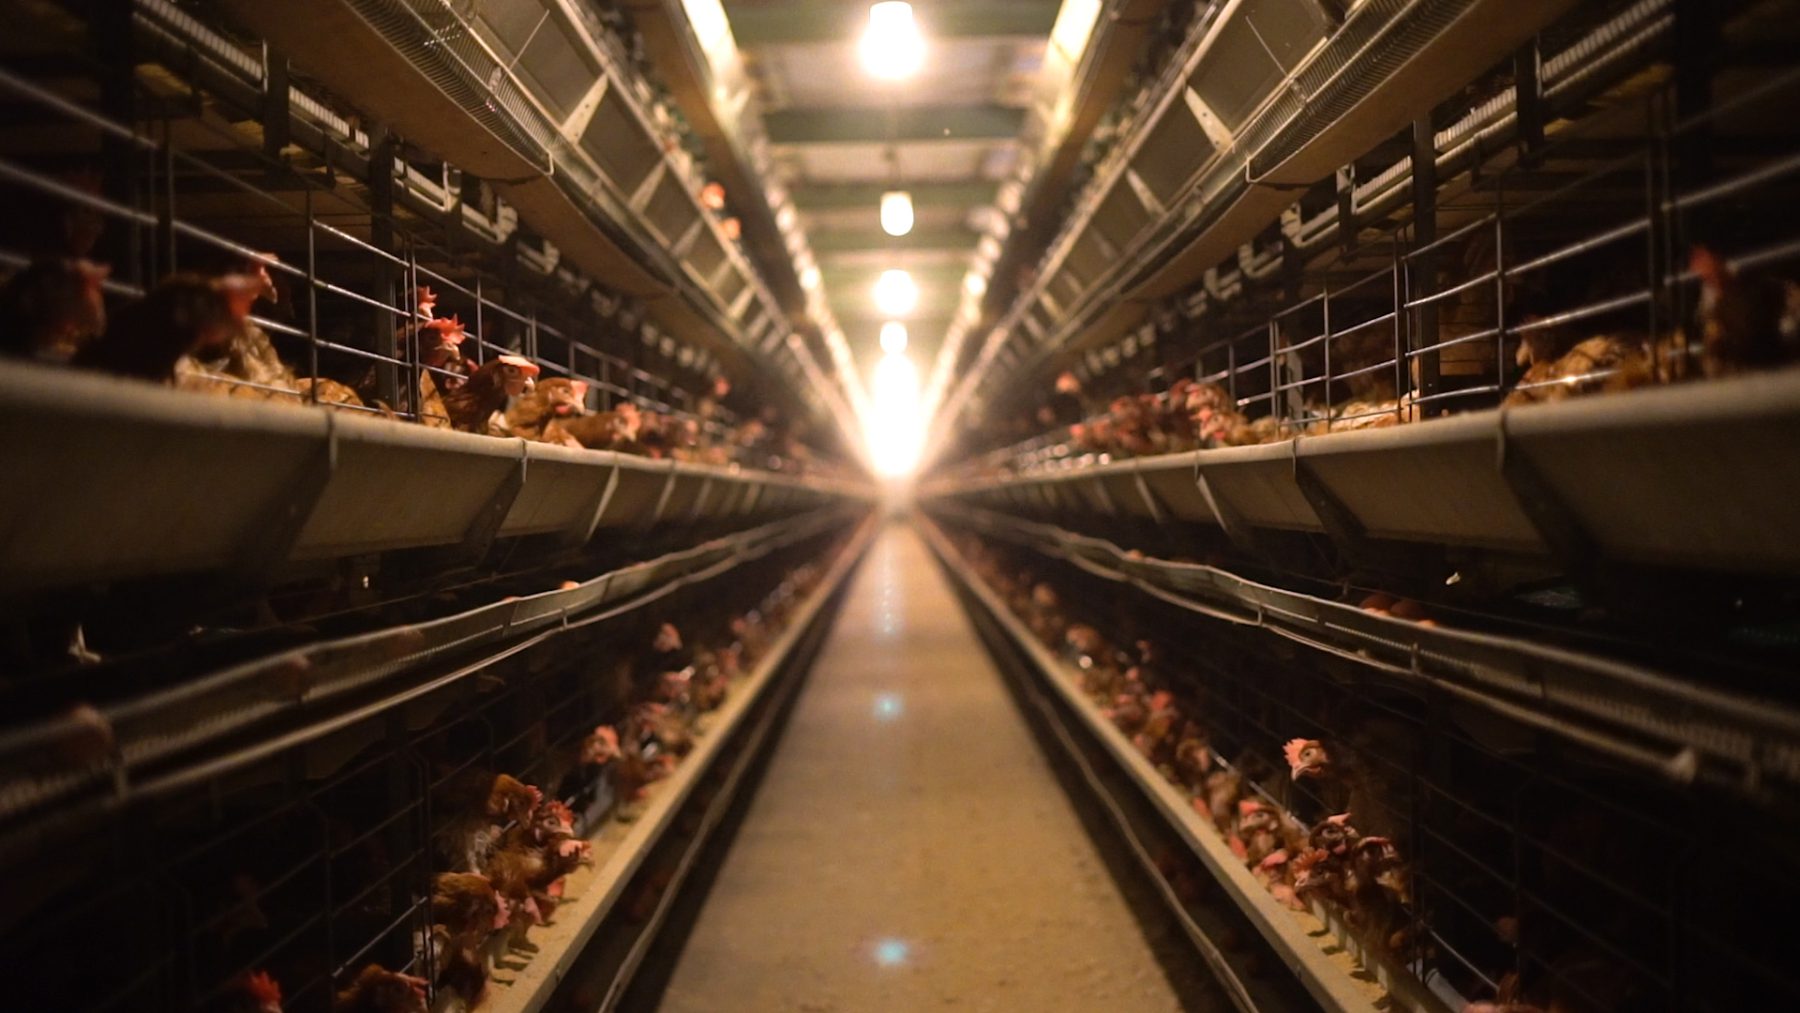 Battery Cages